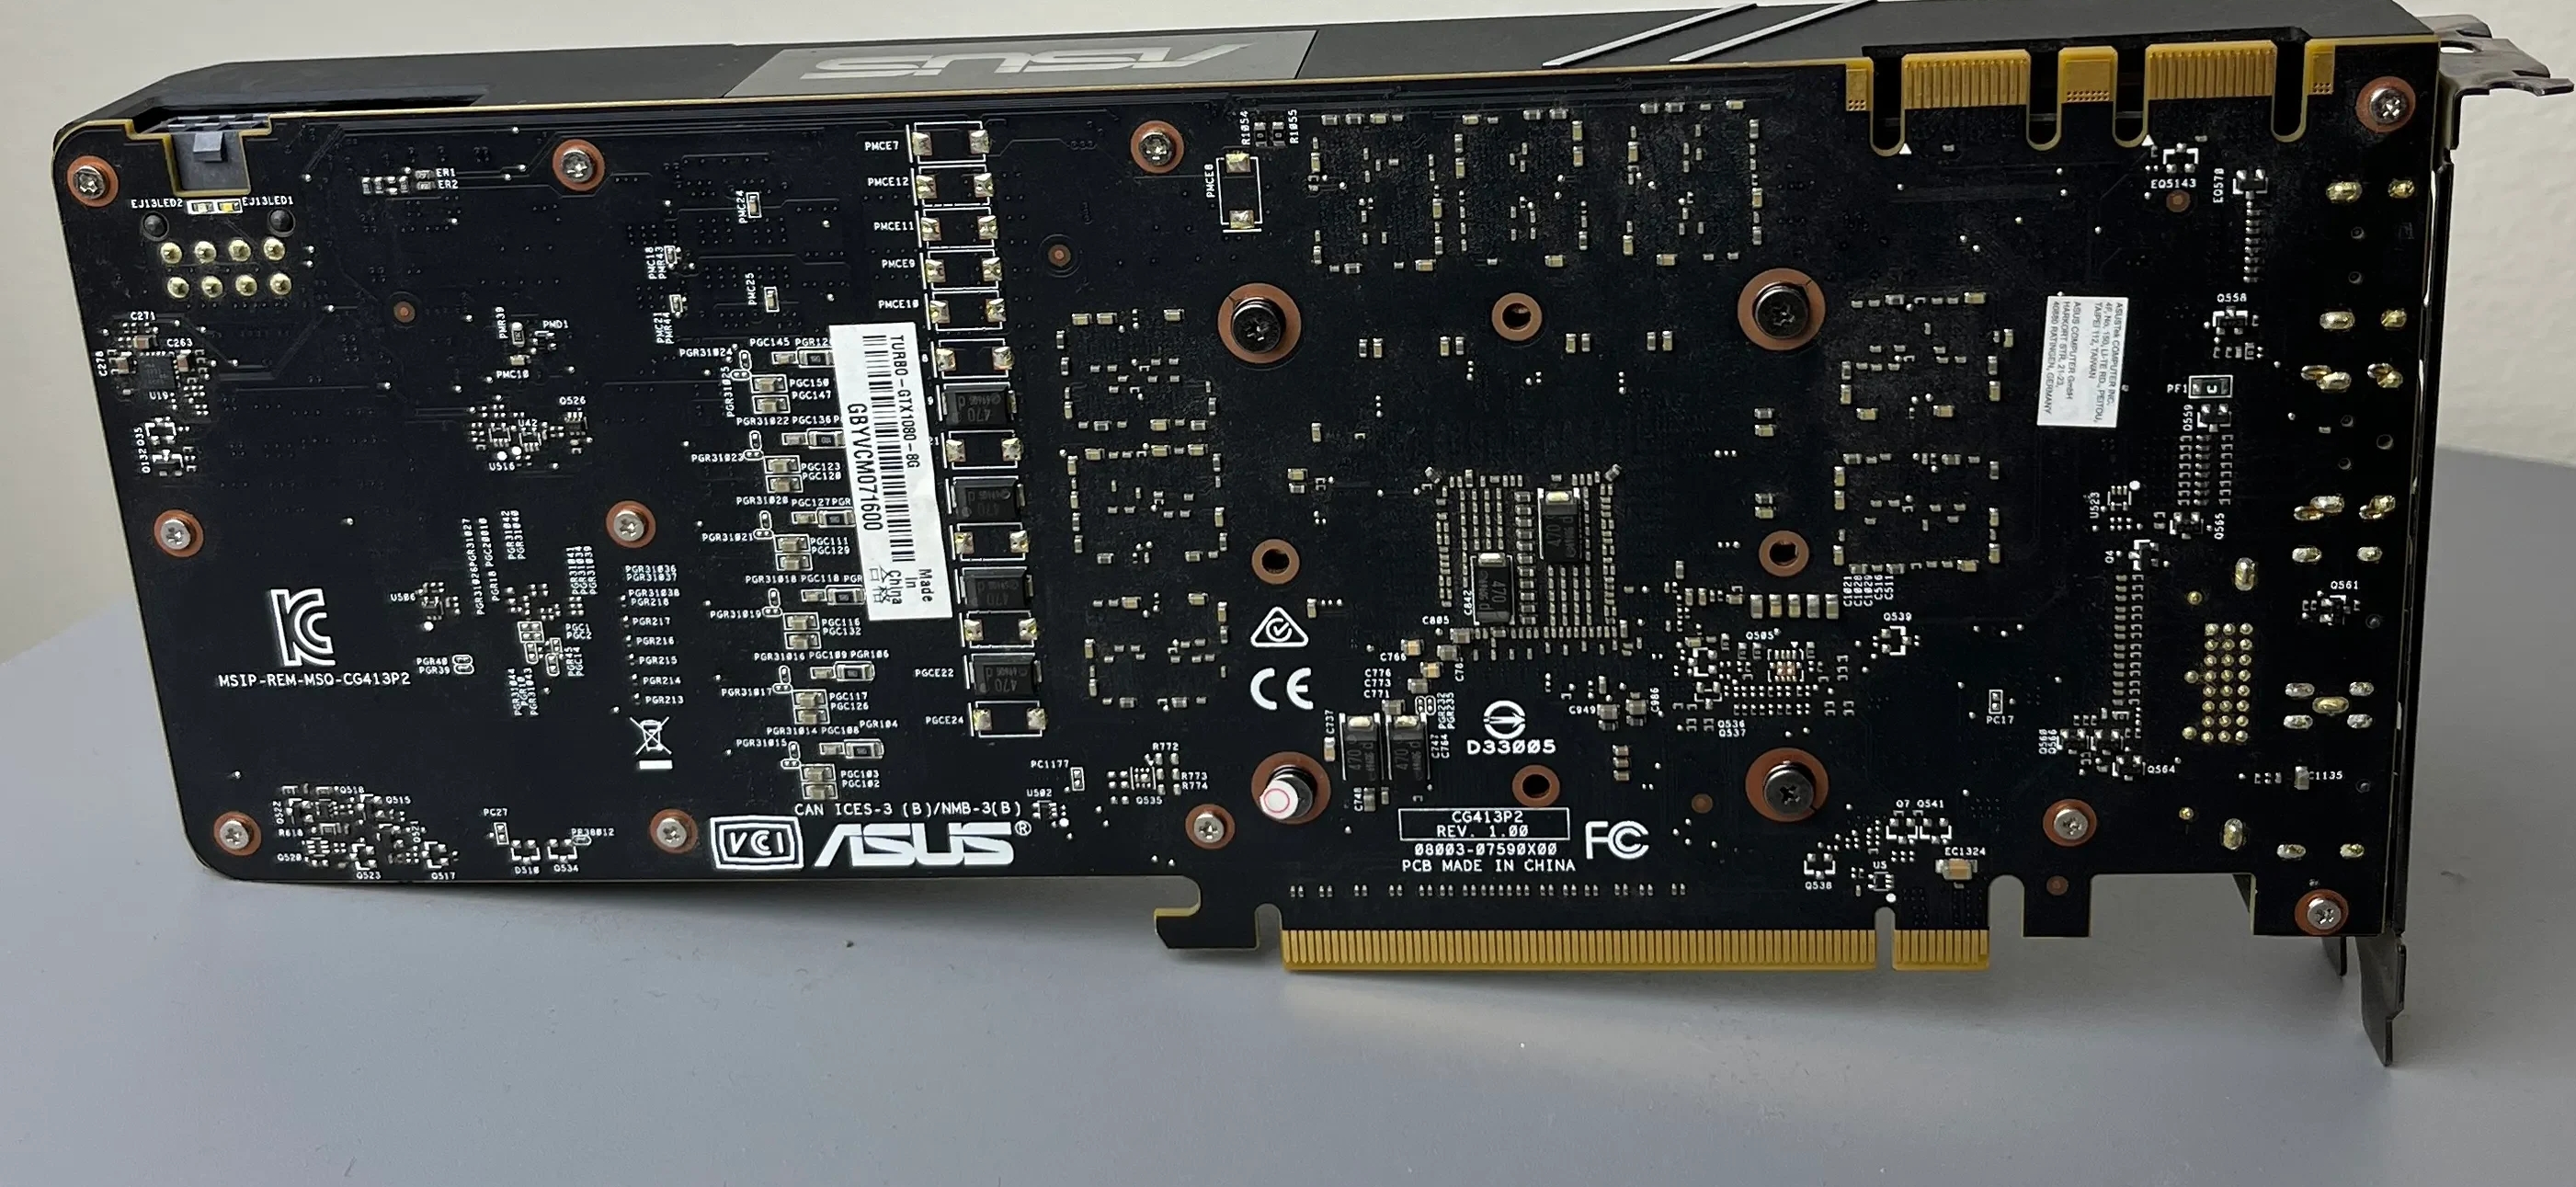 Asus P104-100 4G mining card hack to GTX 1080 possible 